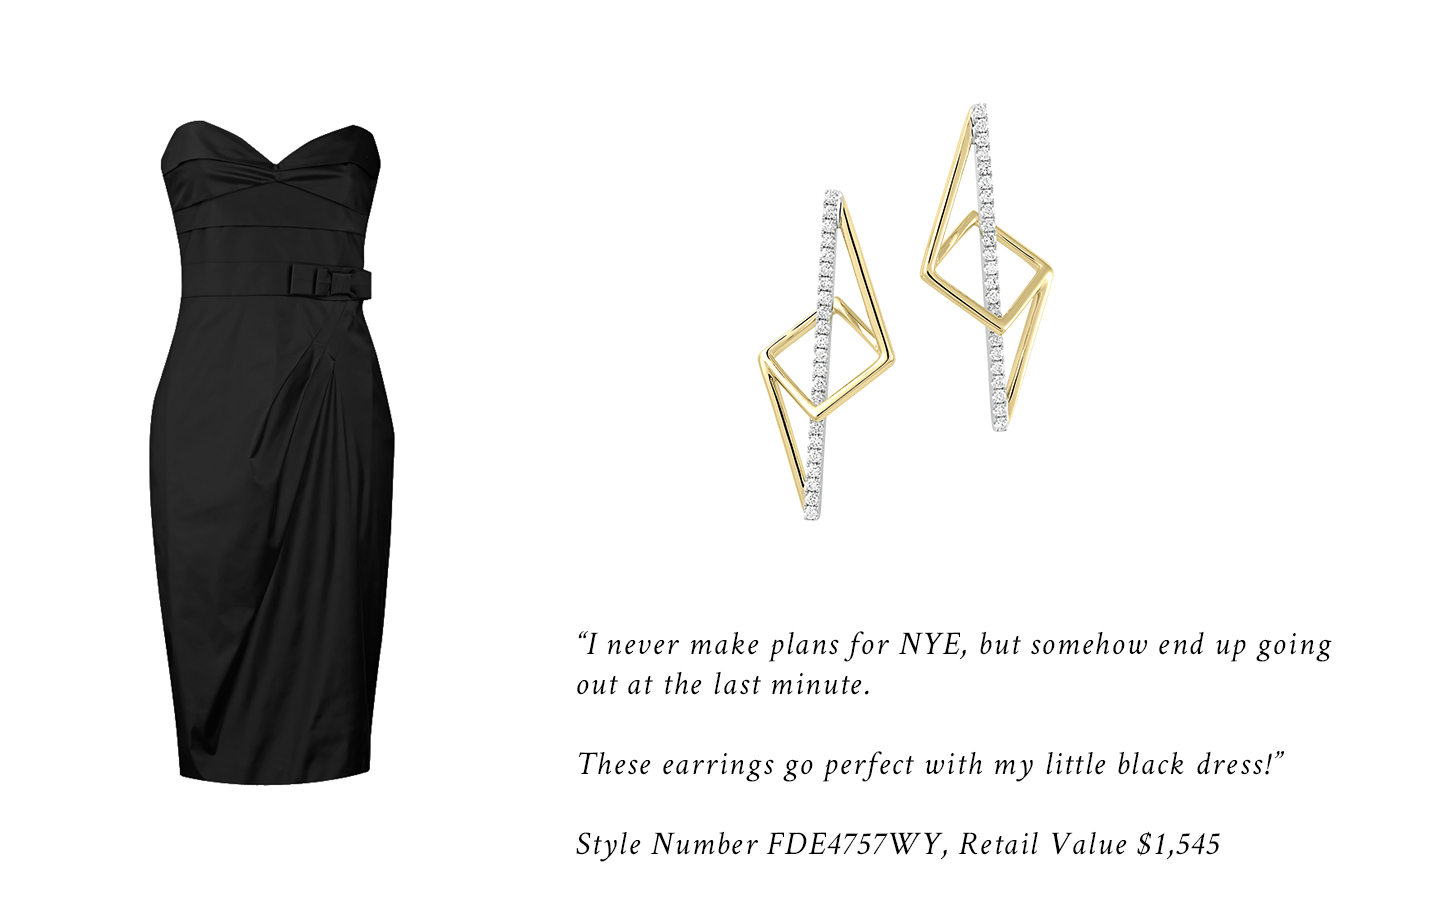 "I never make plans for NYE, but somehow end up going out at the last minute. These earrings go perfect with my little black dress. Style Number FDE4757WY, Retail Value $1,545